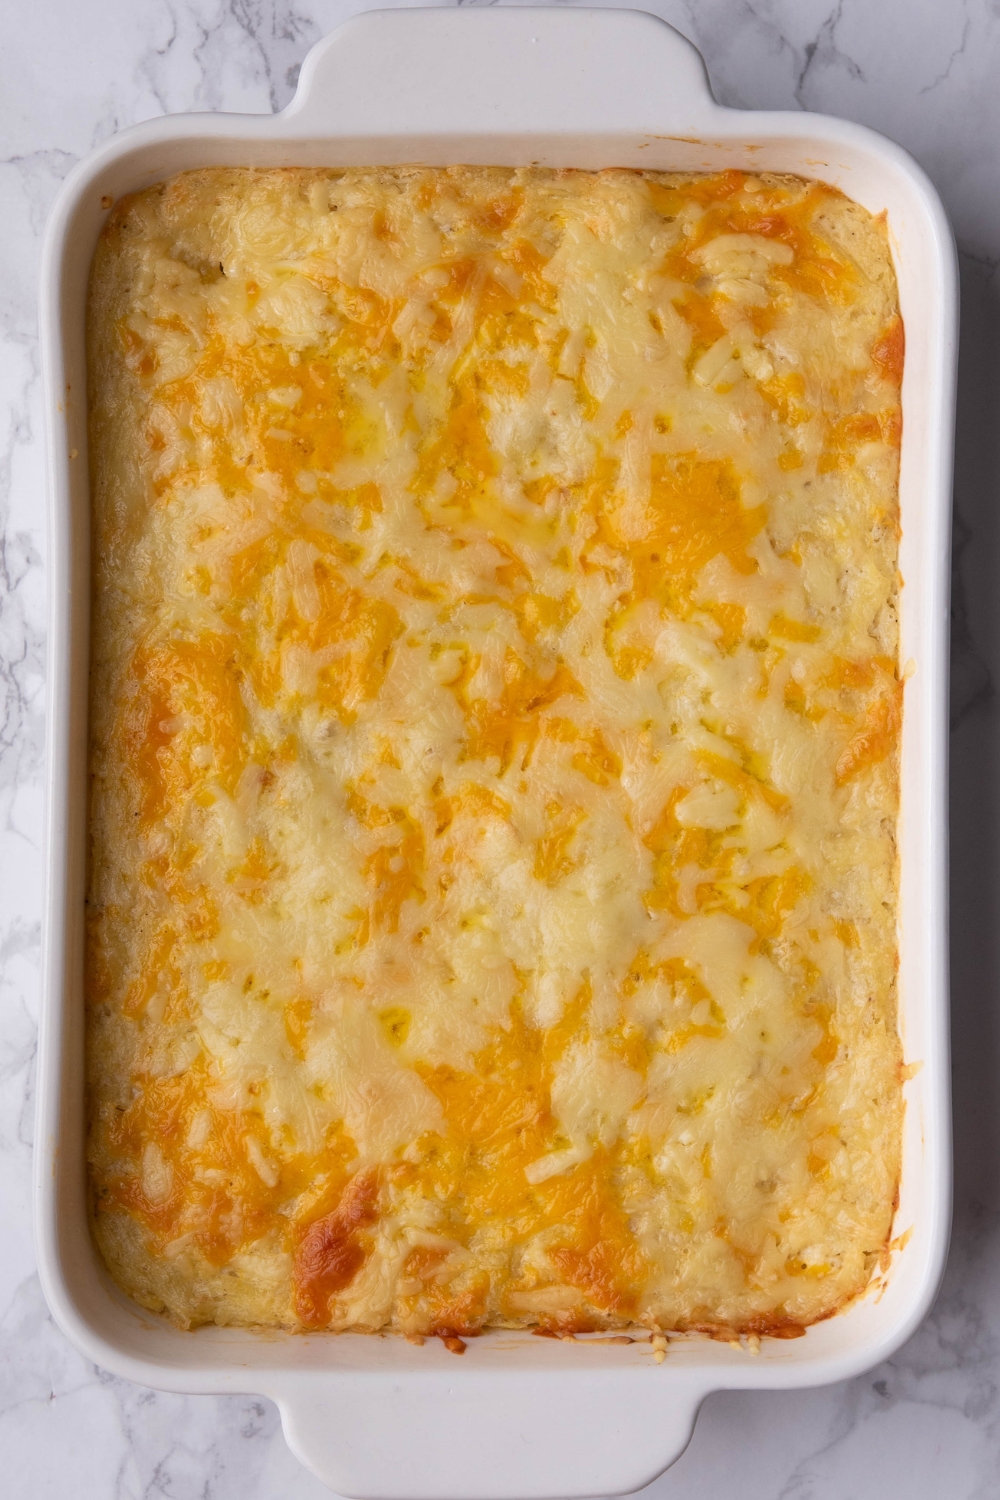 A casserole dish with cooked hash brown casserole in it.